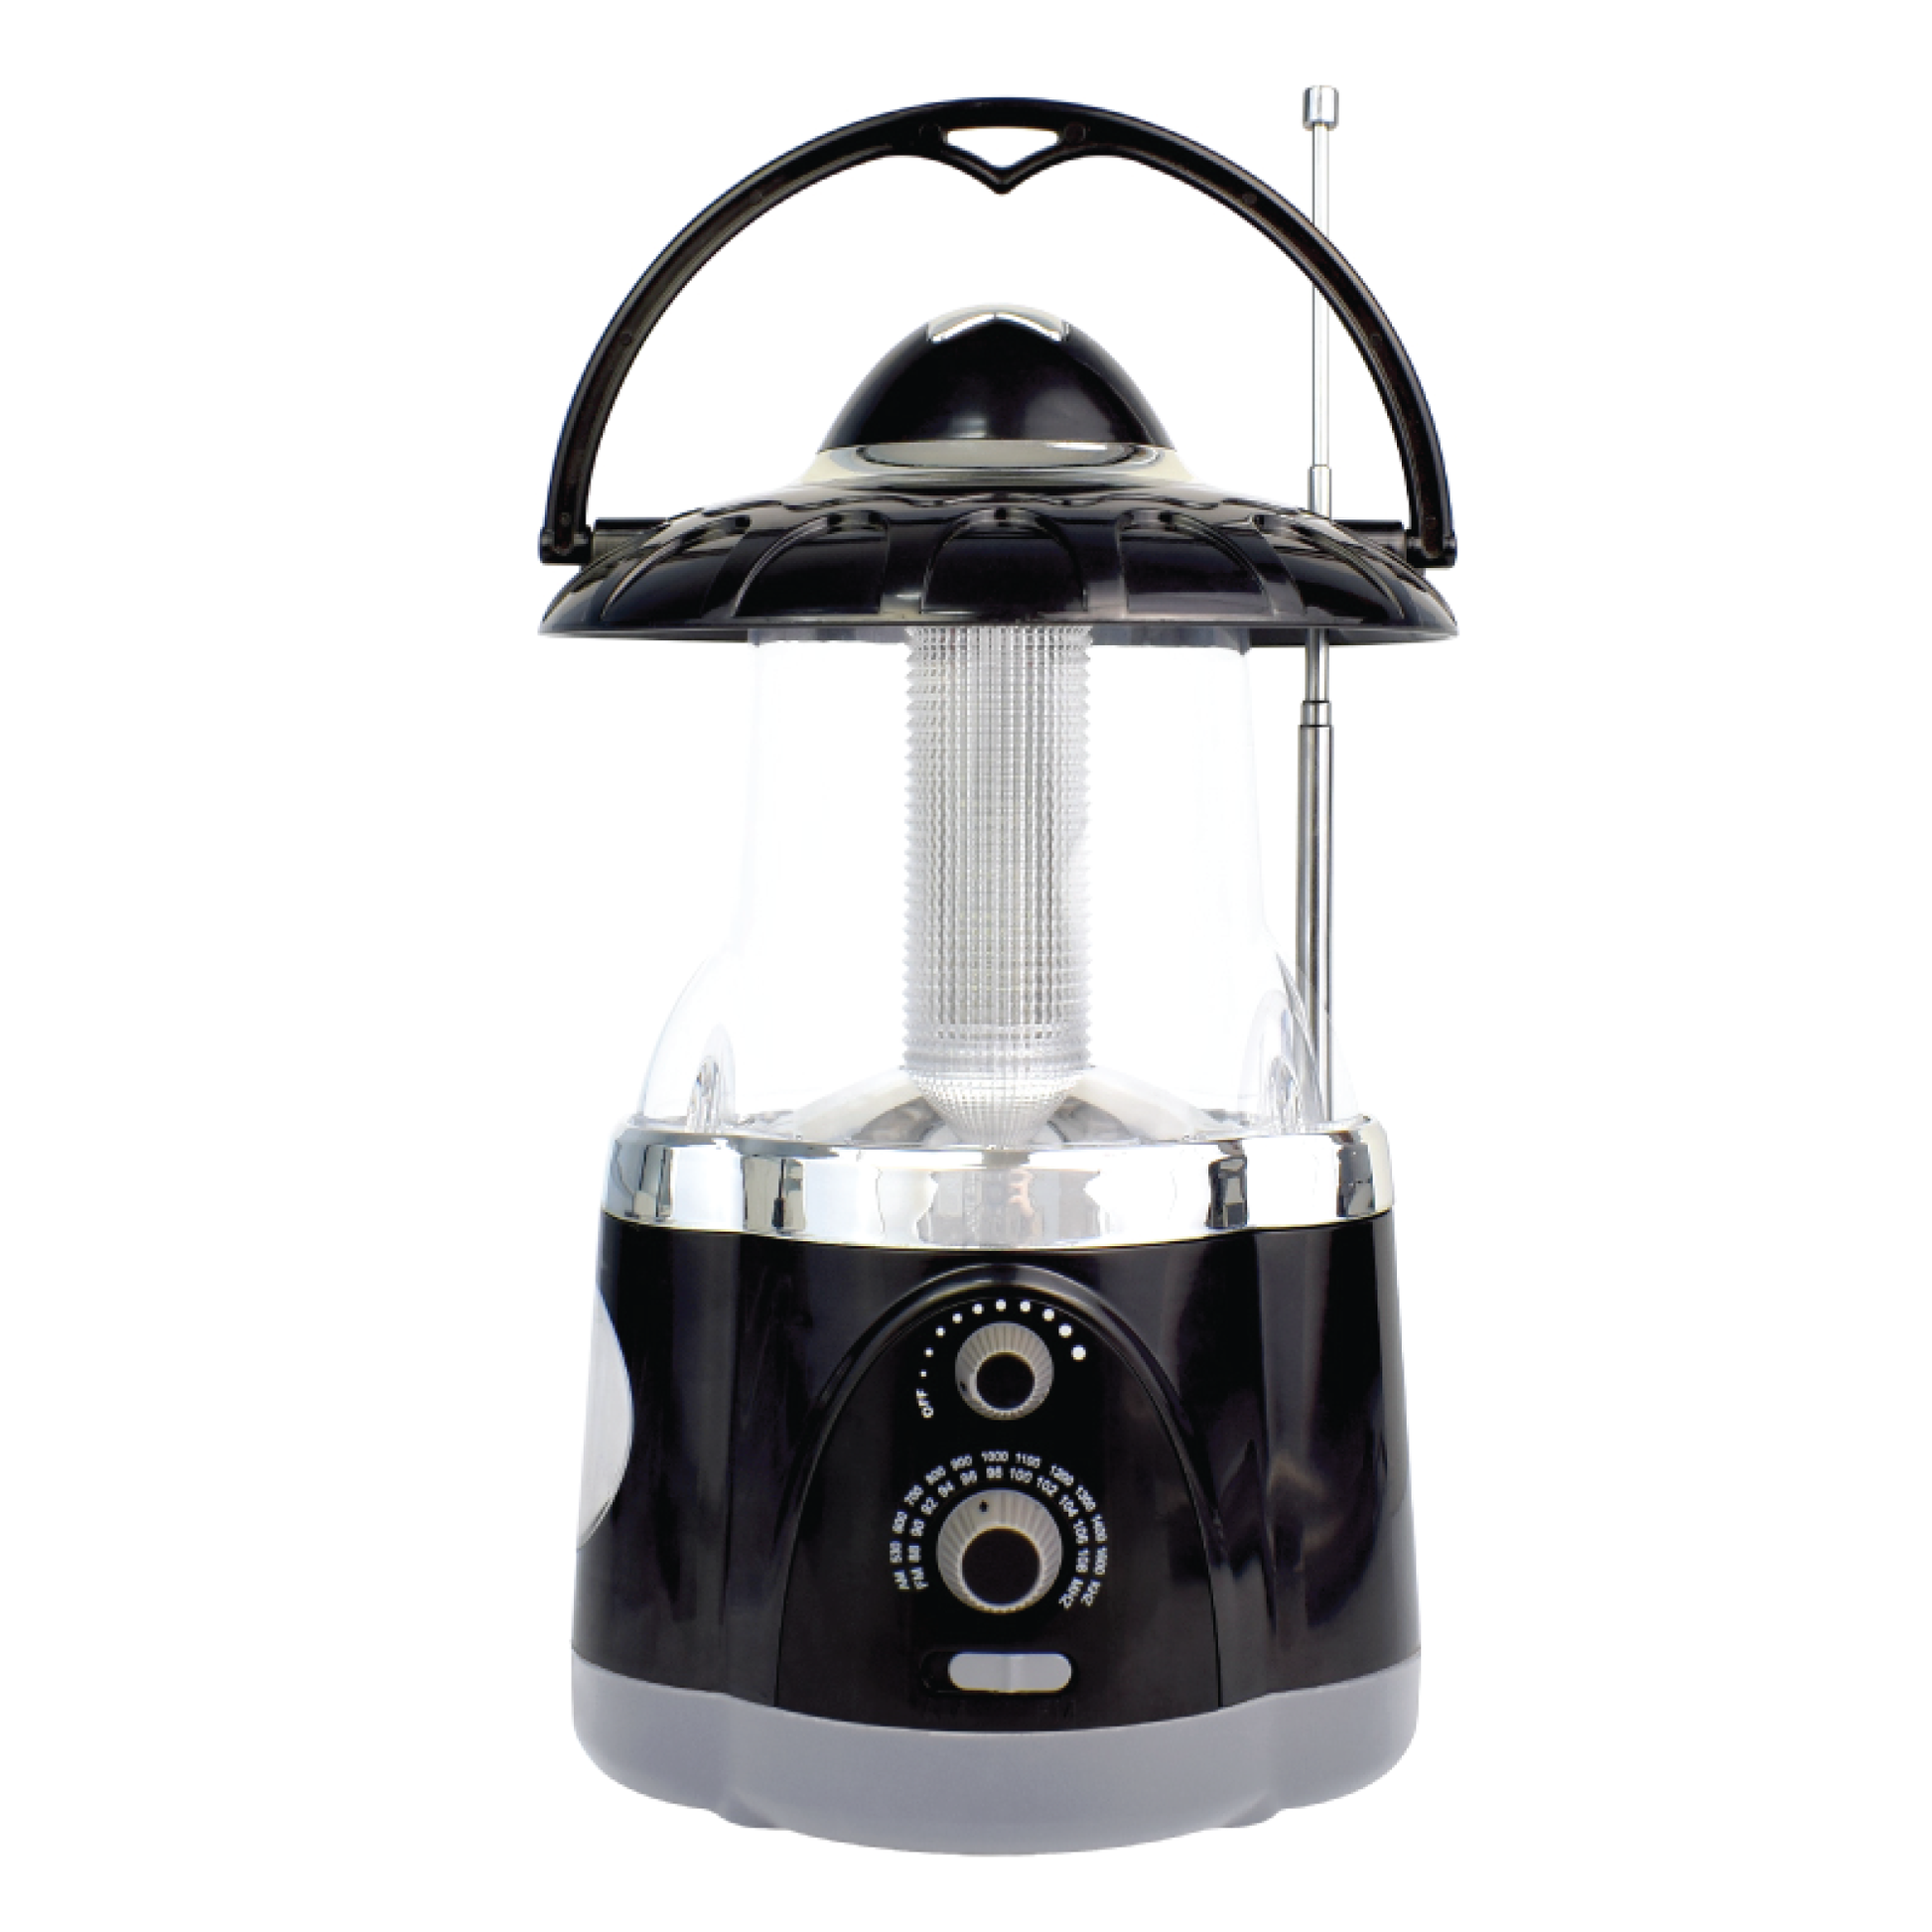 North Point® AM/FM radio lantern in black, featuring 12 bright LED bulbs, central reflector, 4 ultra-bright LED flashlight, and fold away carry handle.